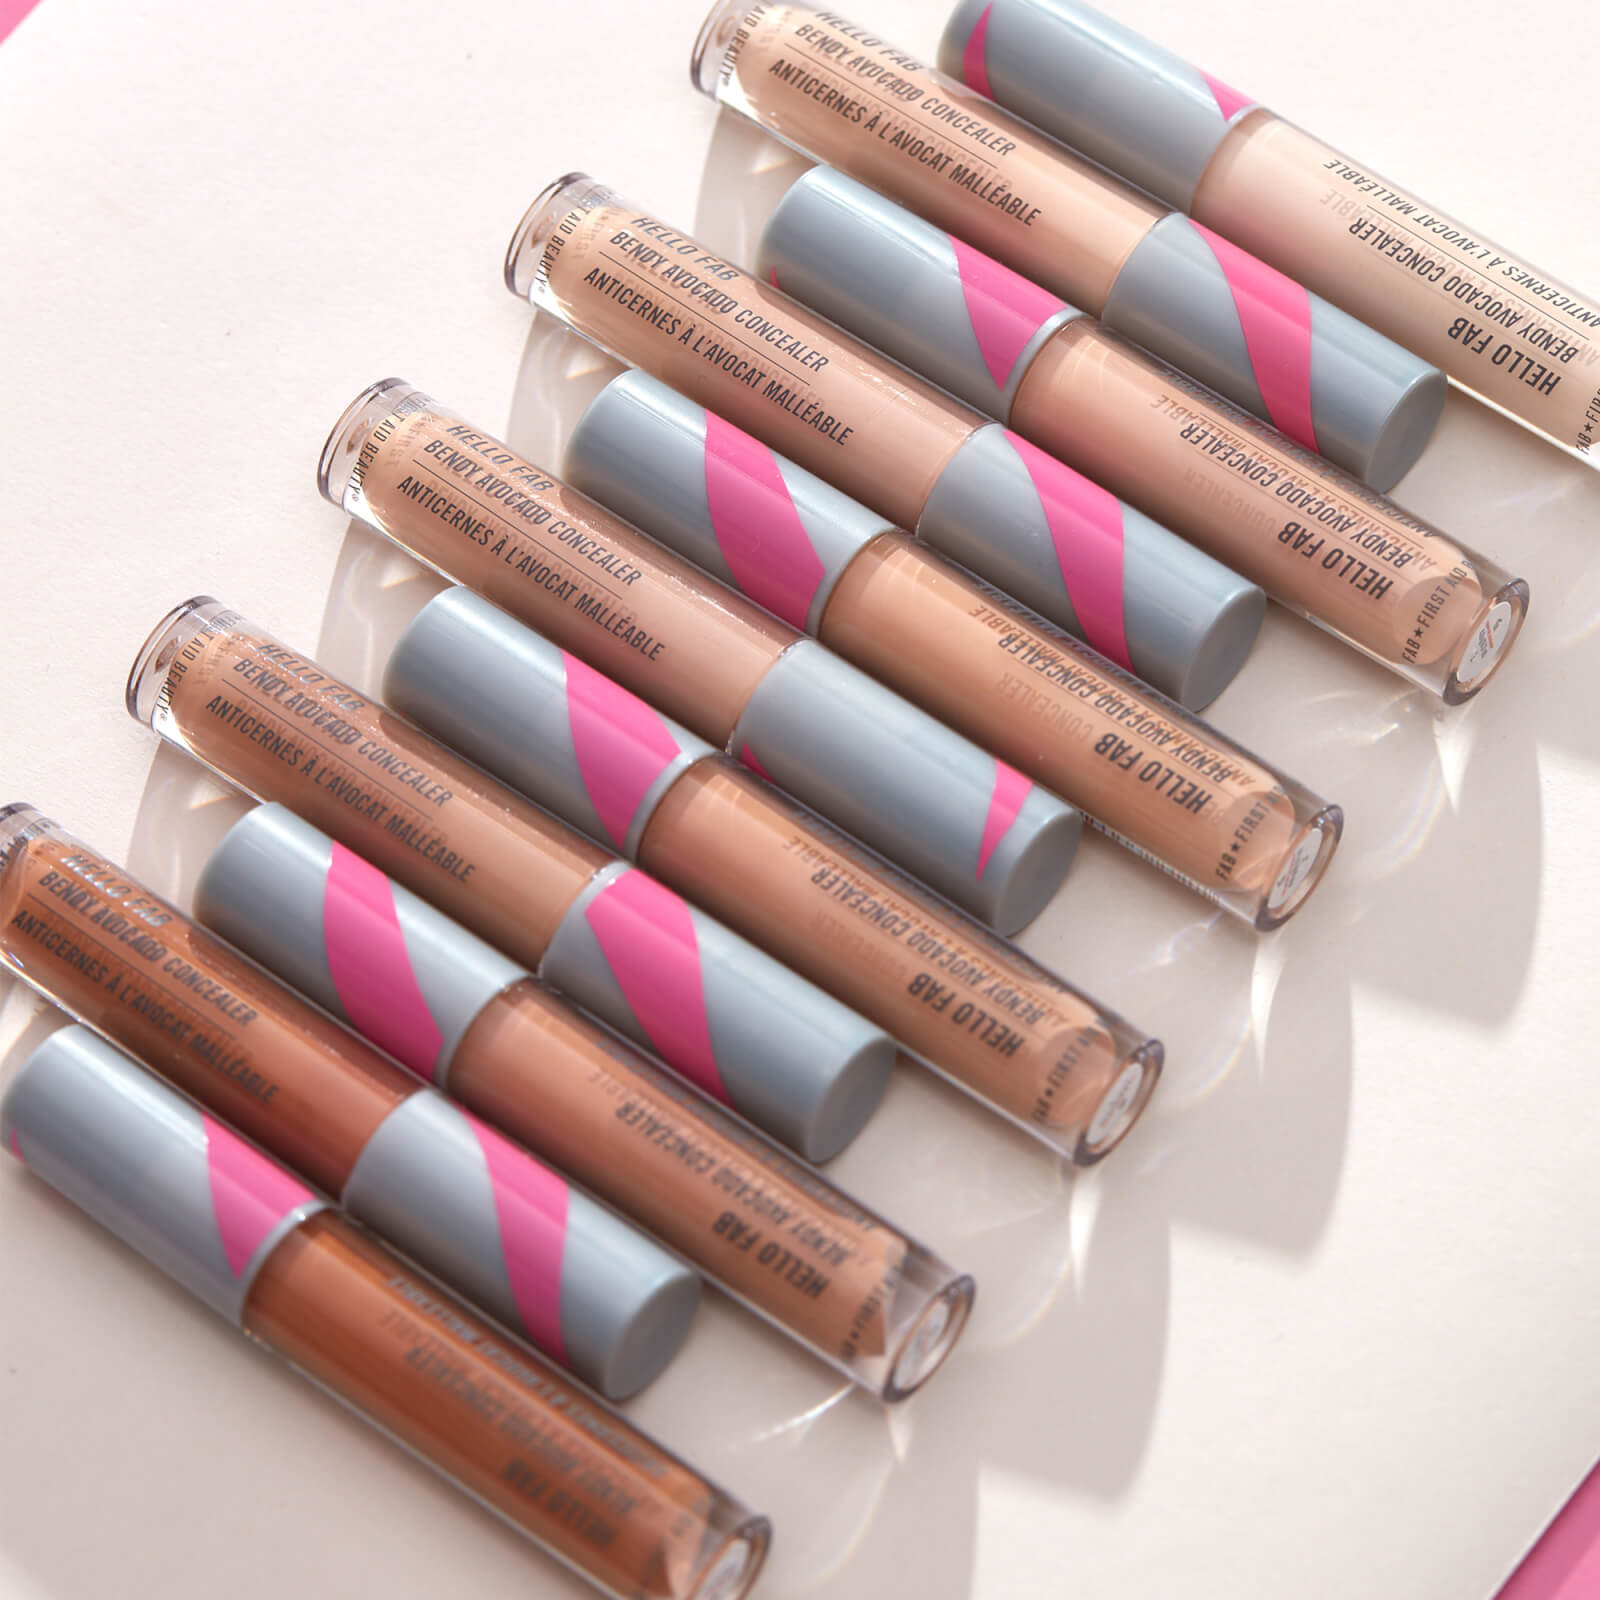 First Aid Beauty Hello FAB Bendy Avocado Concealer 4.8g (Various Shades) - Cocoa